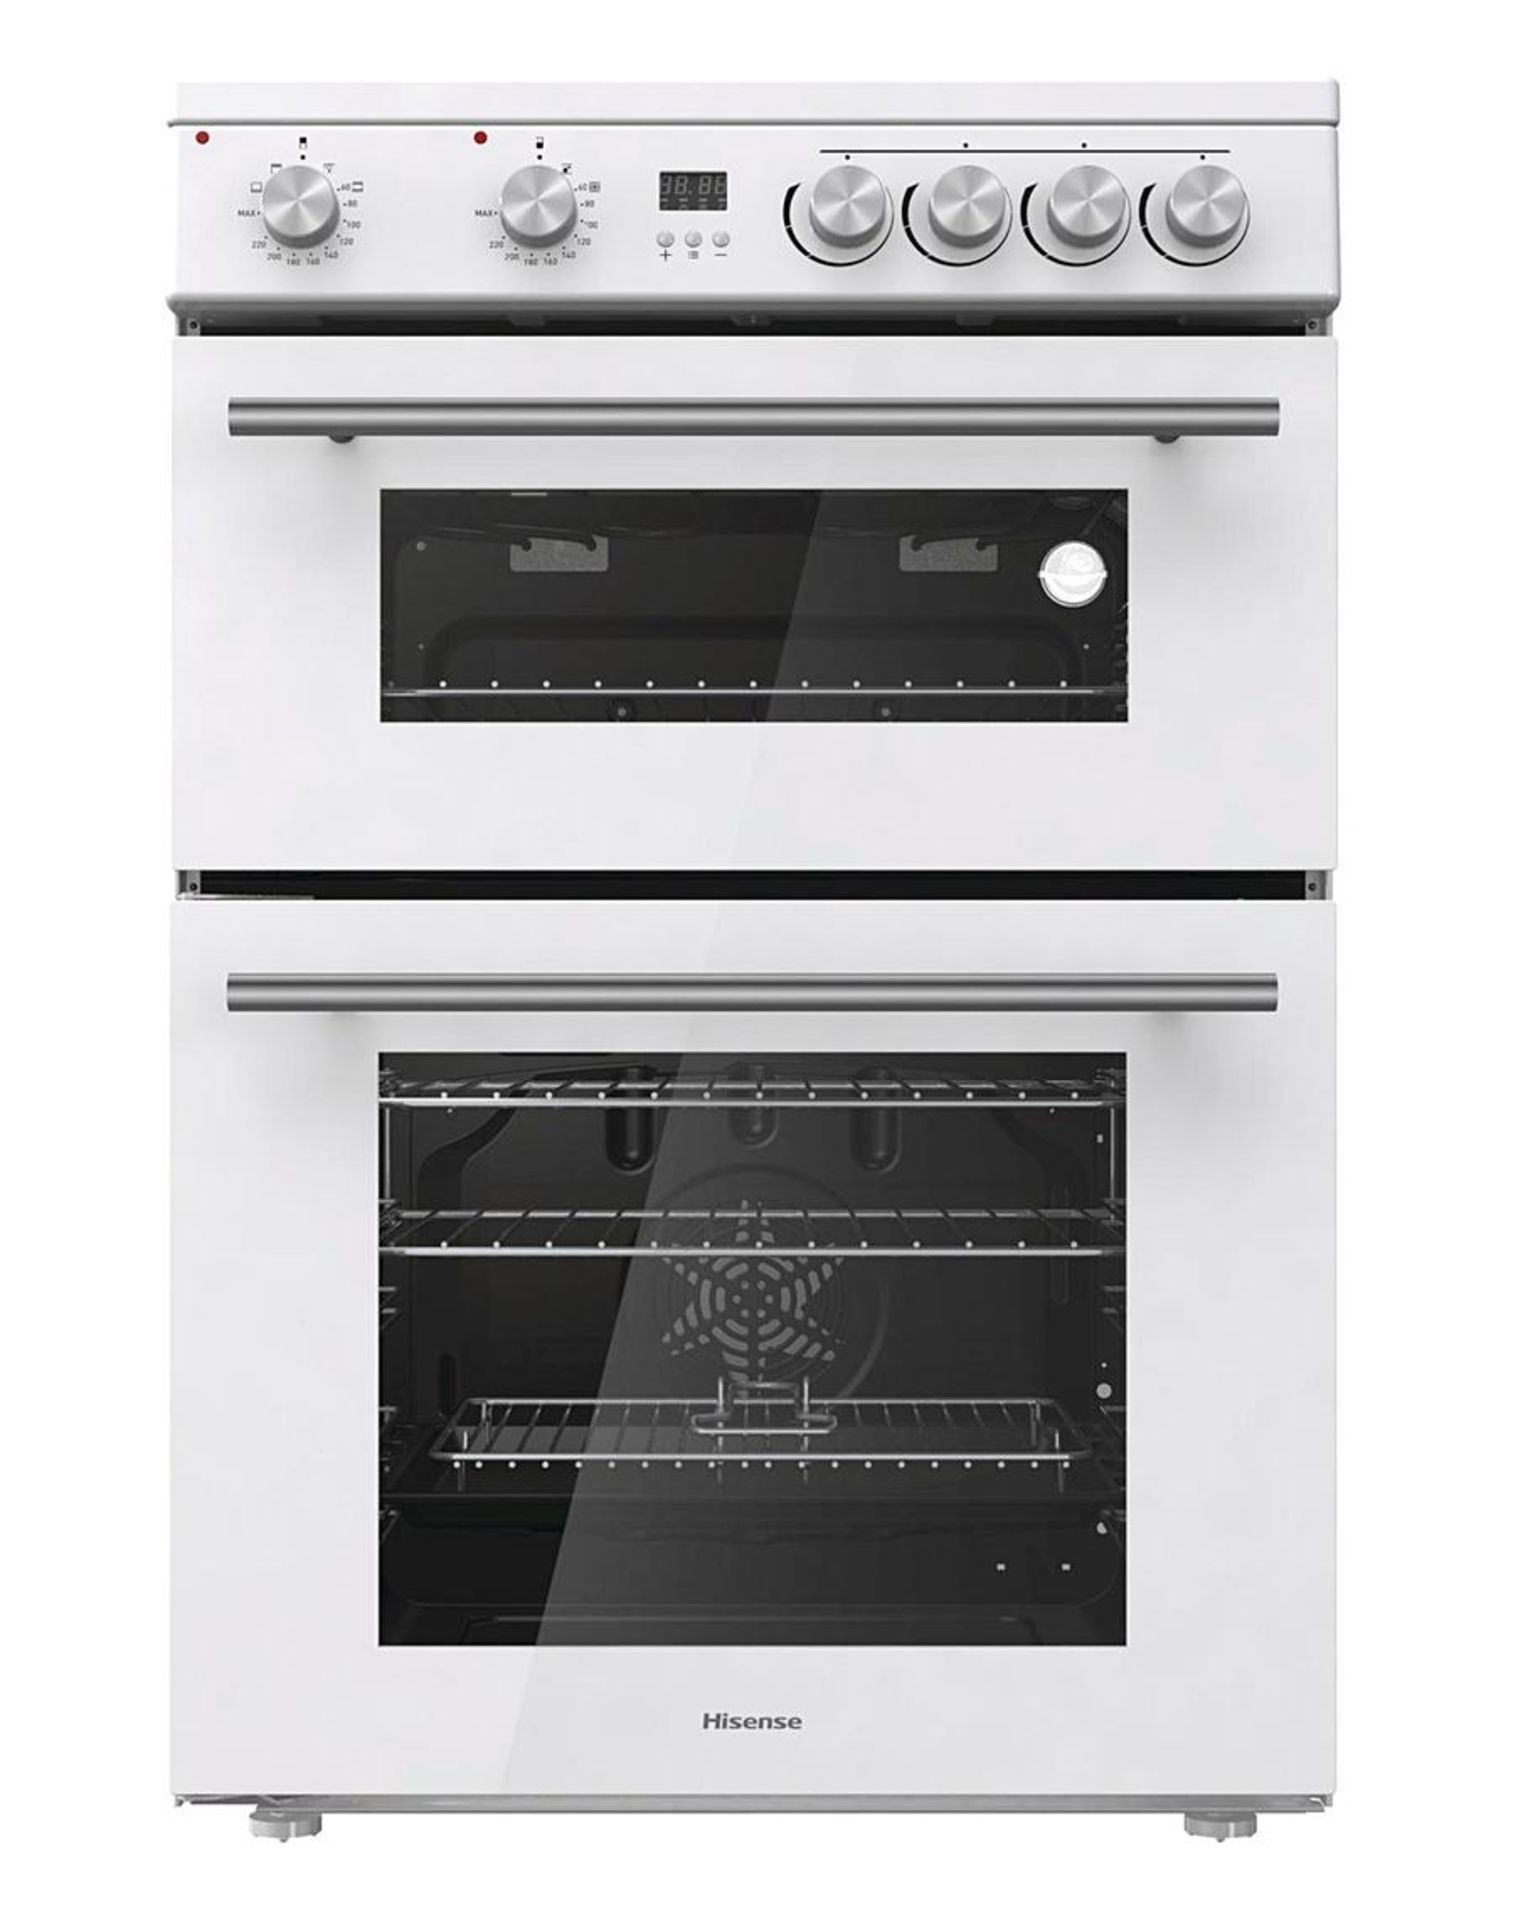 (REF118379) Hisense HDE3211BWUK Freestanding Electric Cooker - White RRP 749.99. Introducing our